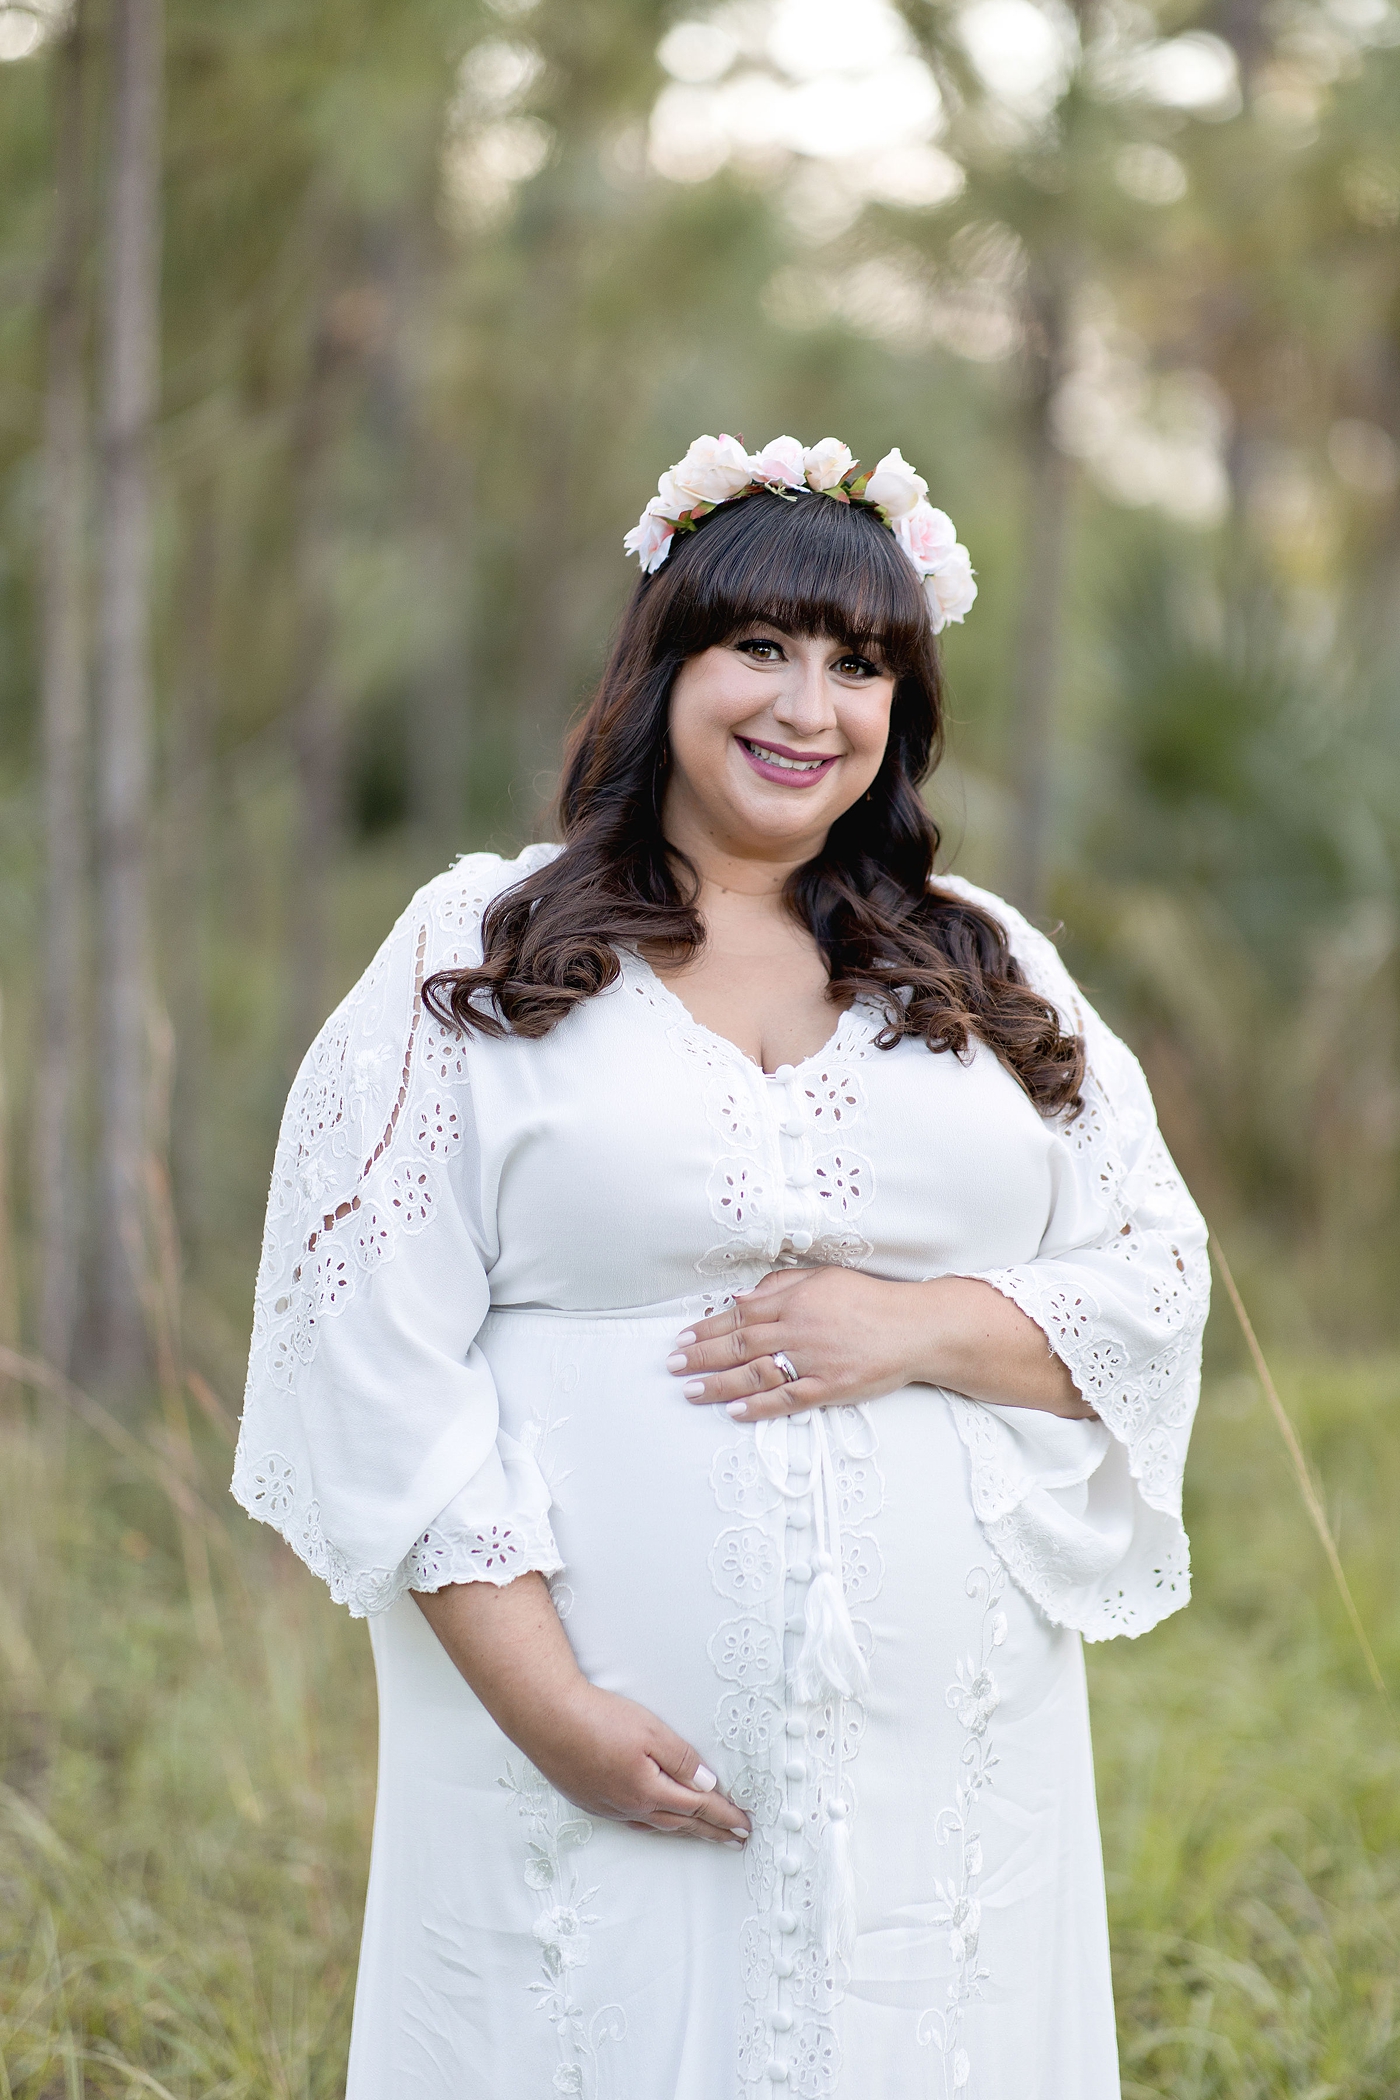 Pregnant mom smiles at camera while holding her belly. Photo by South Florida Maternity Photographer Ivanna Vidal Photography.